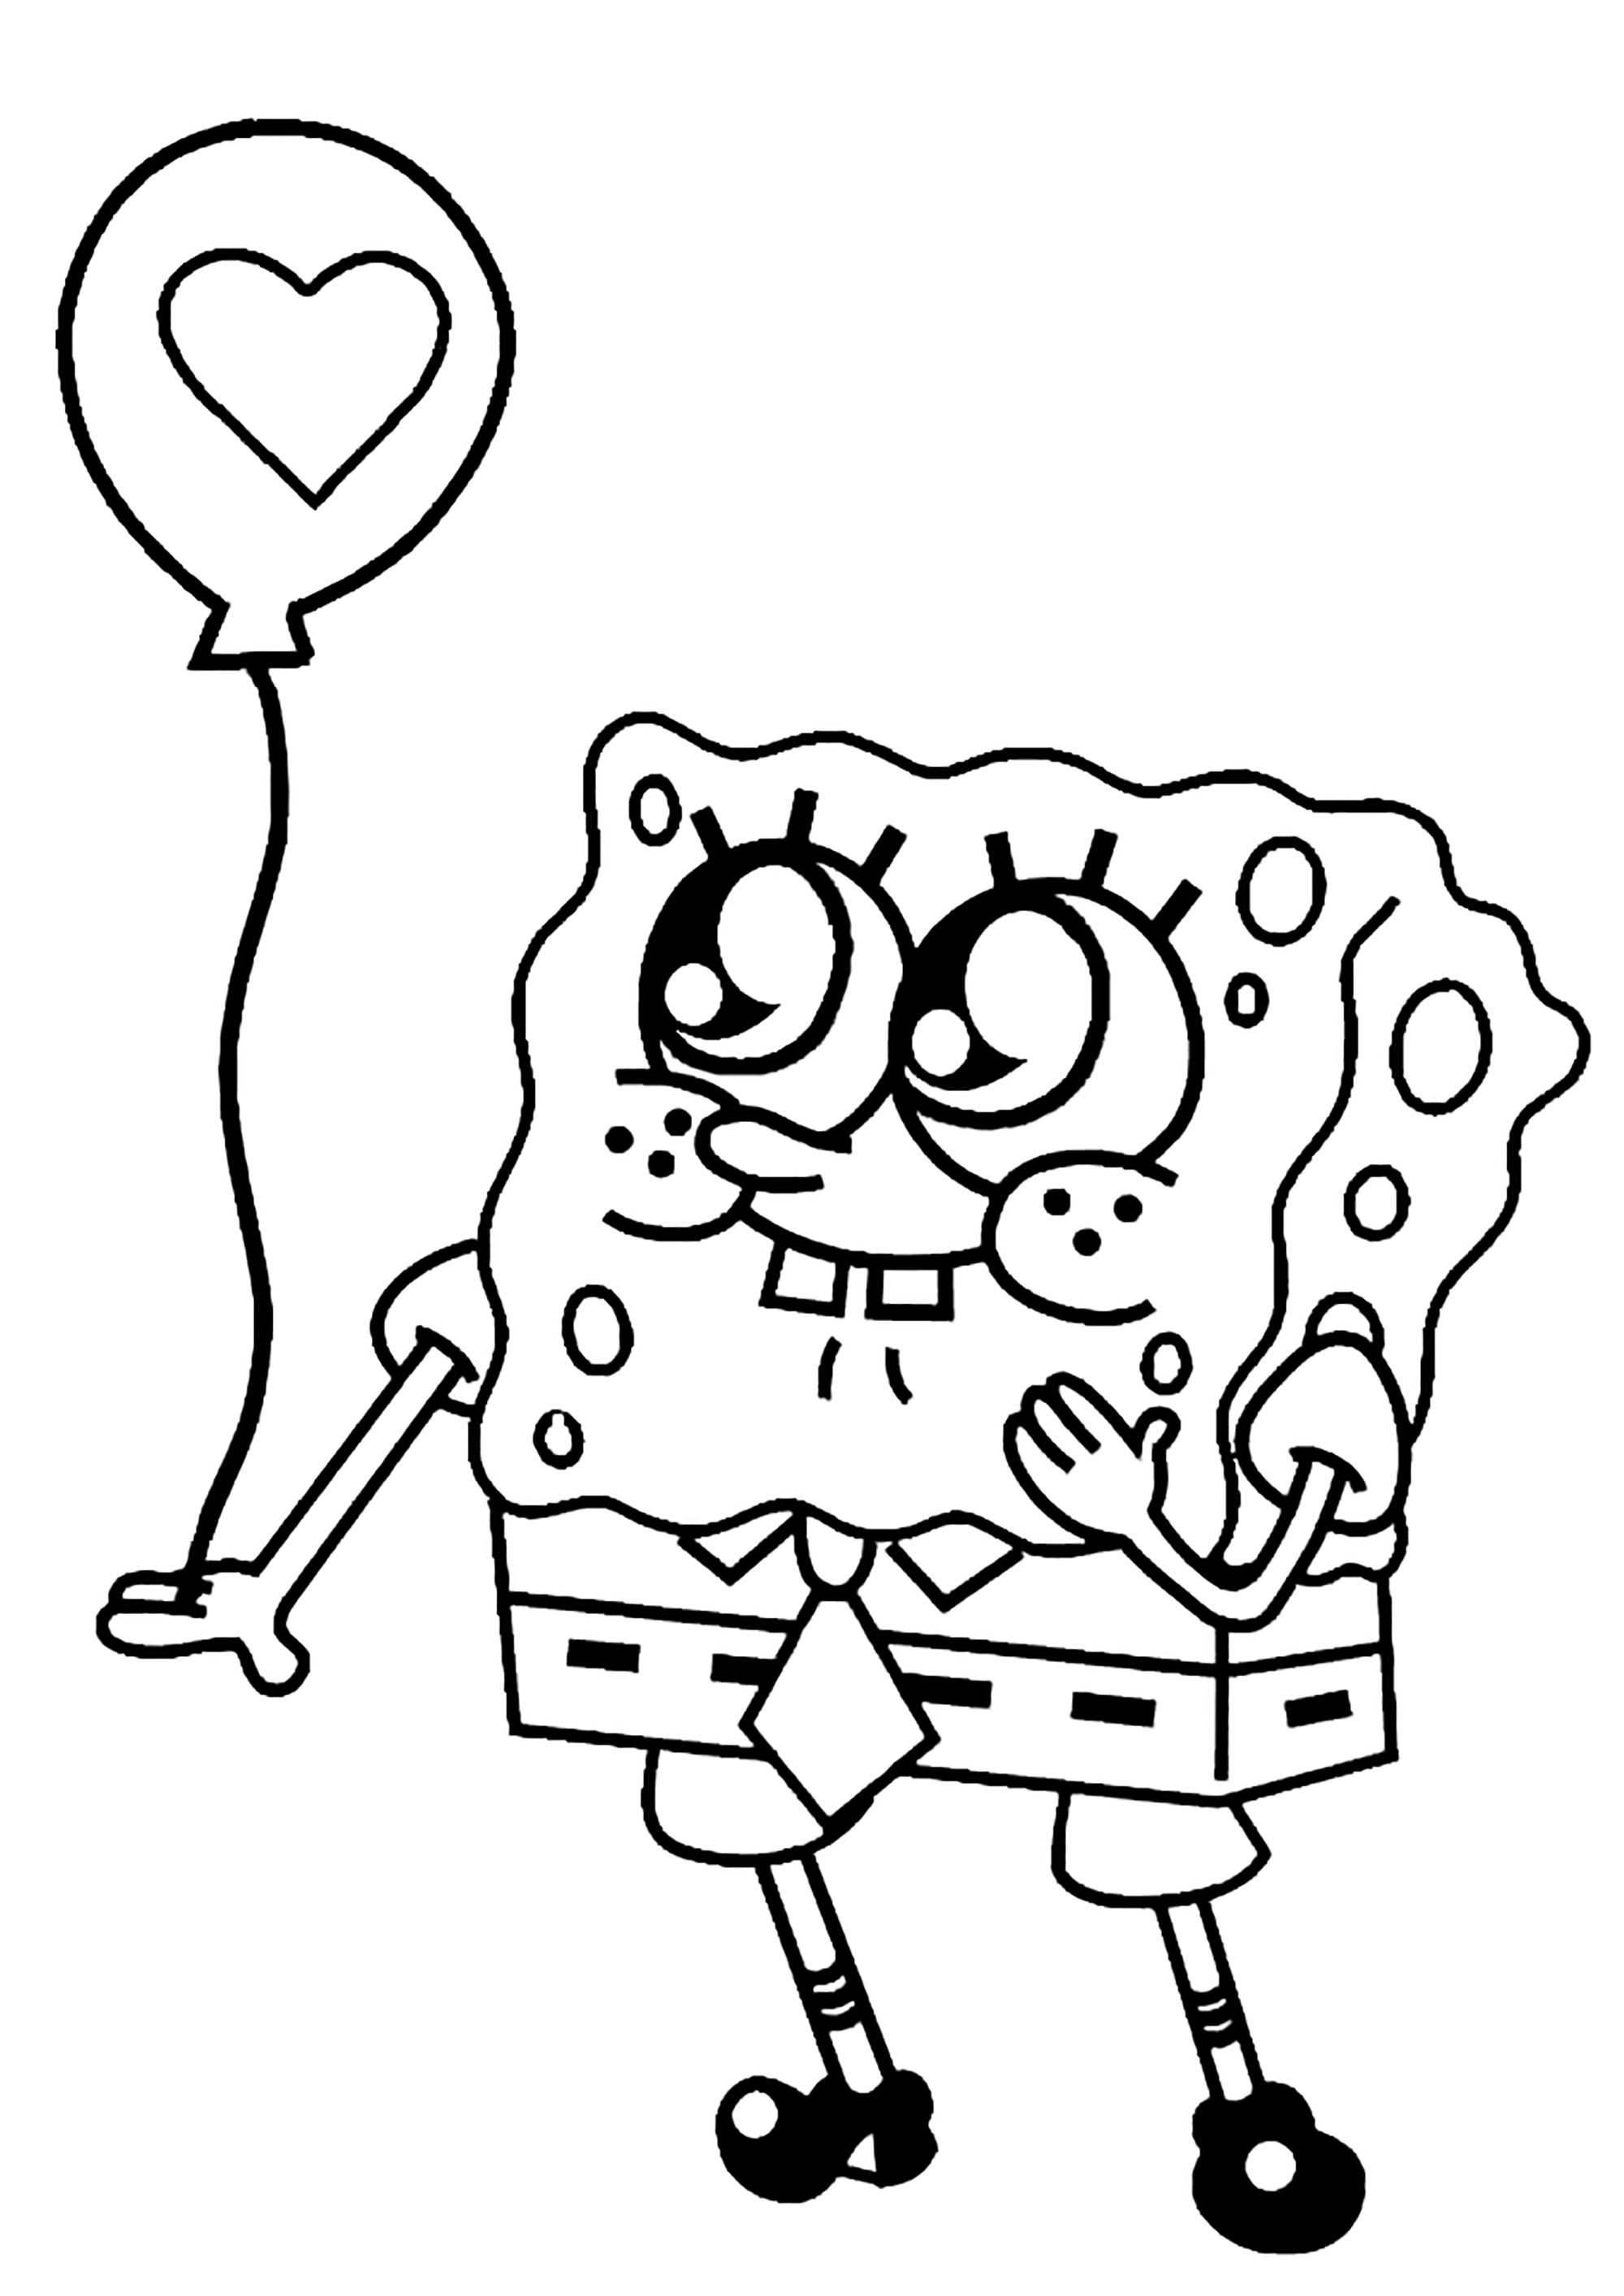 Simple Sponge. Bob drawing to color, with a balloon featuring a heart design